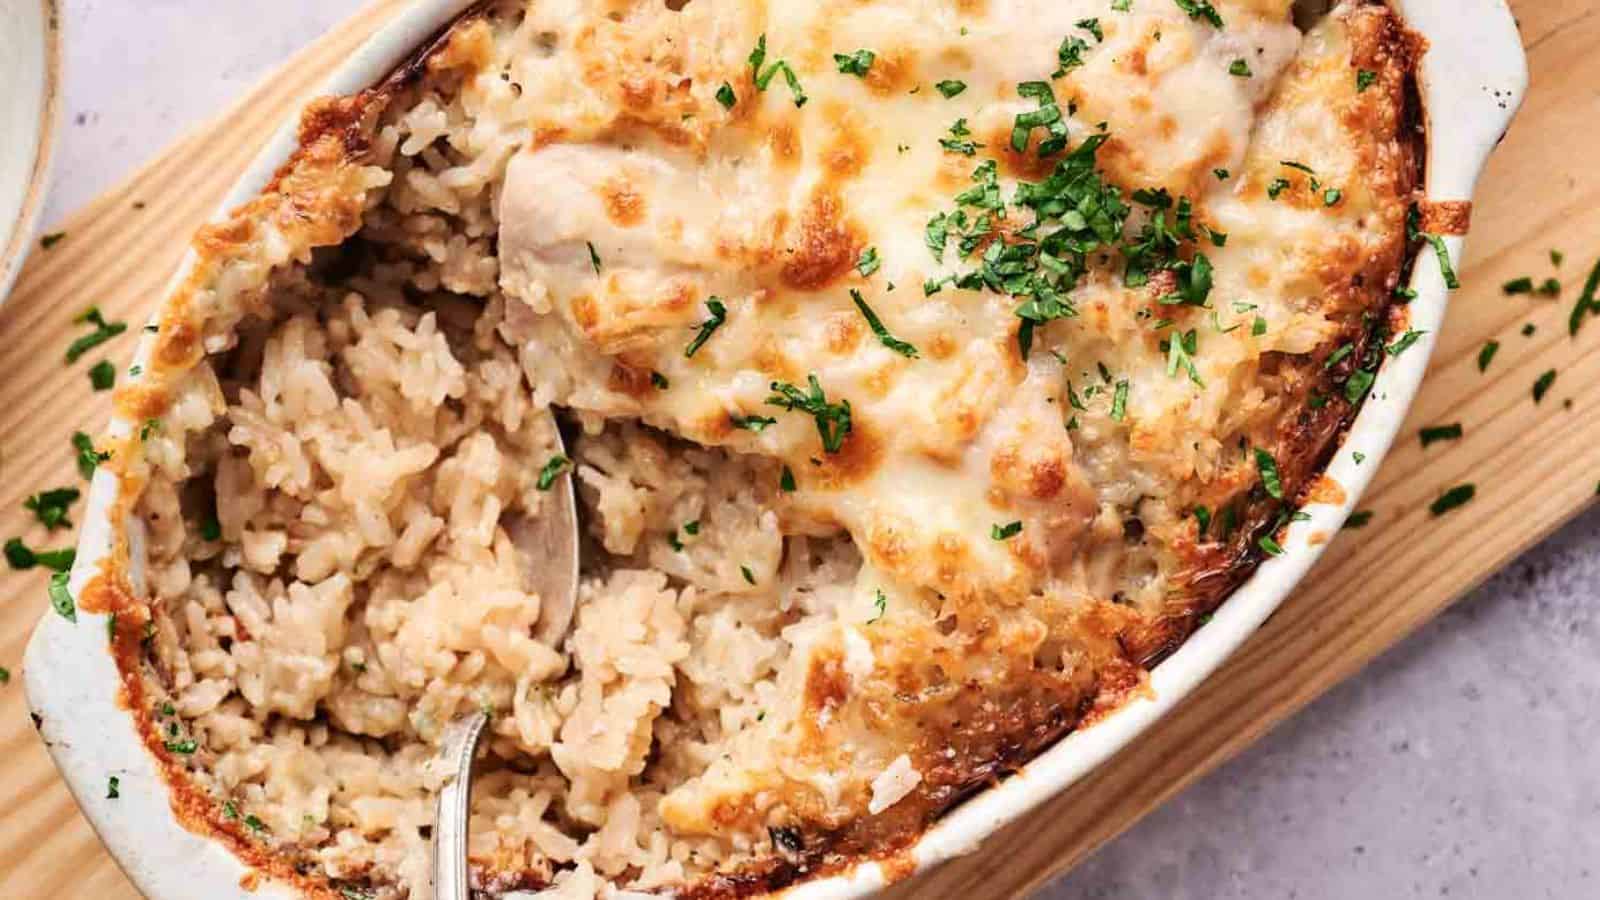 Baked rice casserole with melted cheese on top, garnished with chopped herbs.